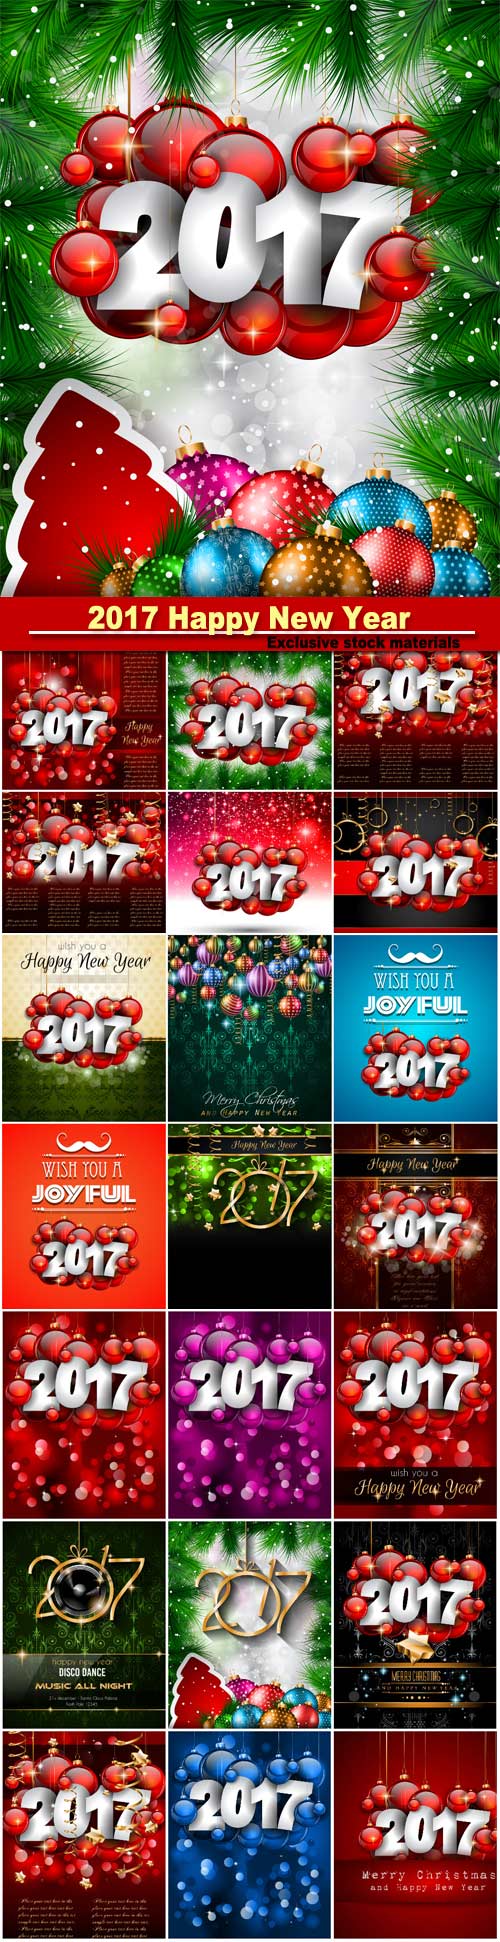 2017 Happy New Year background, flyers and greetings card or christmas themed invitations